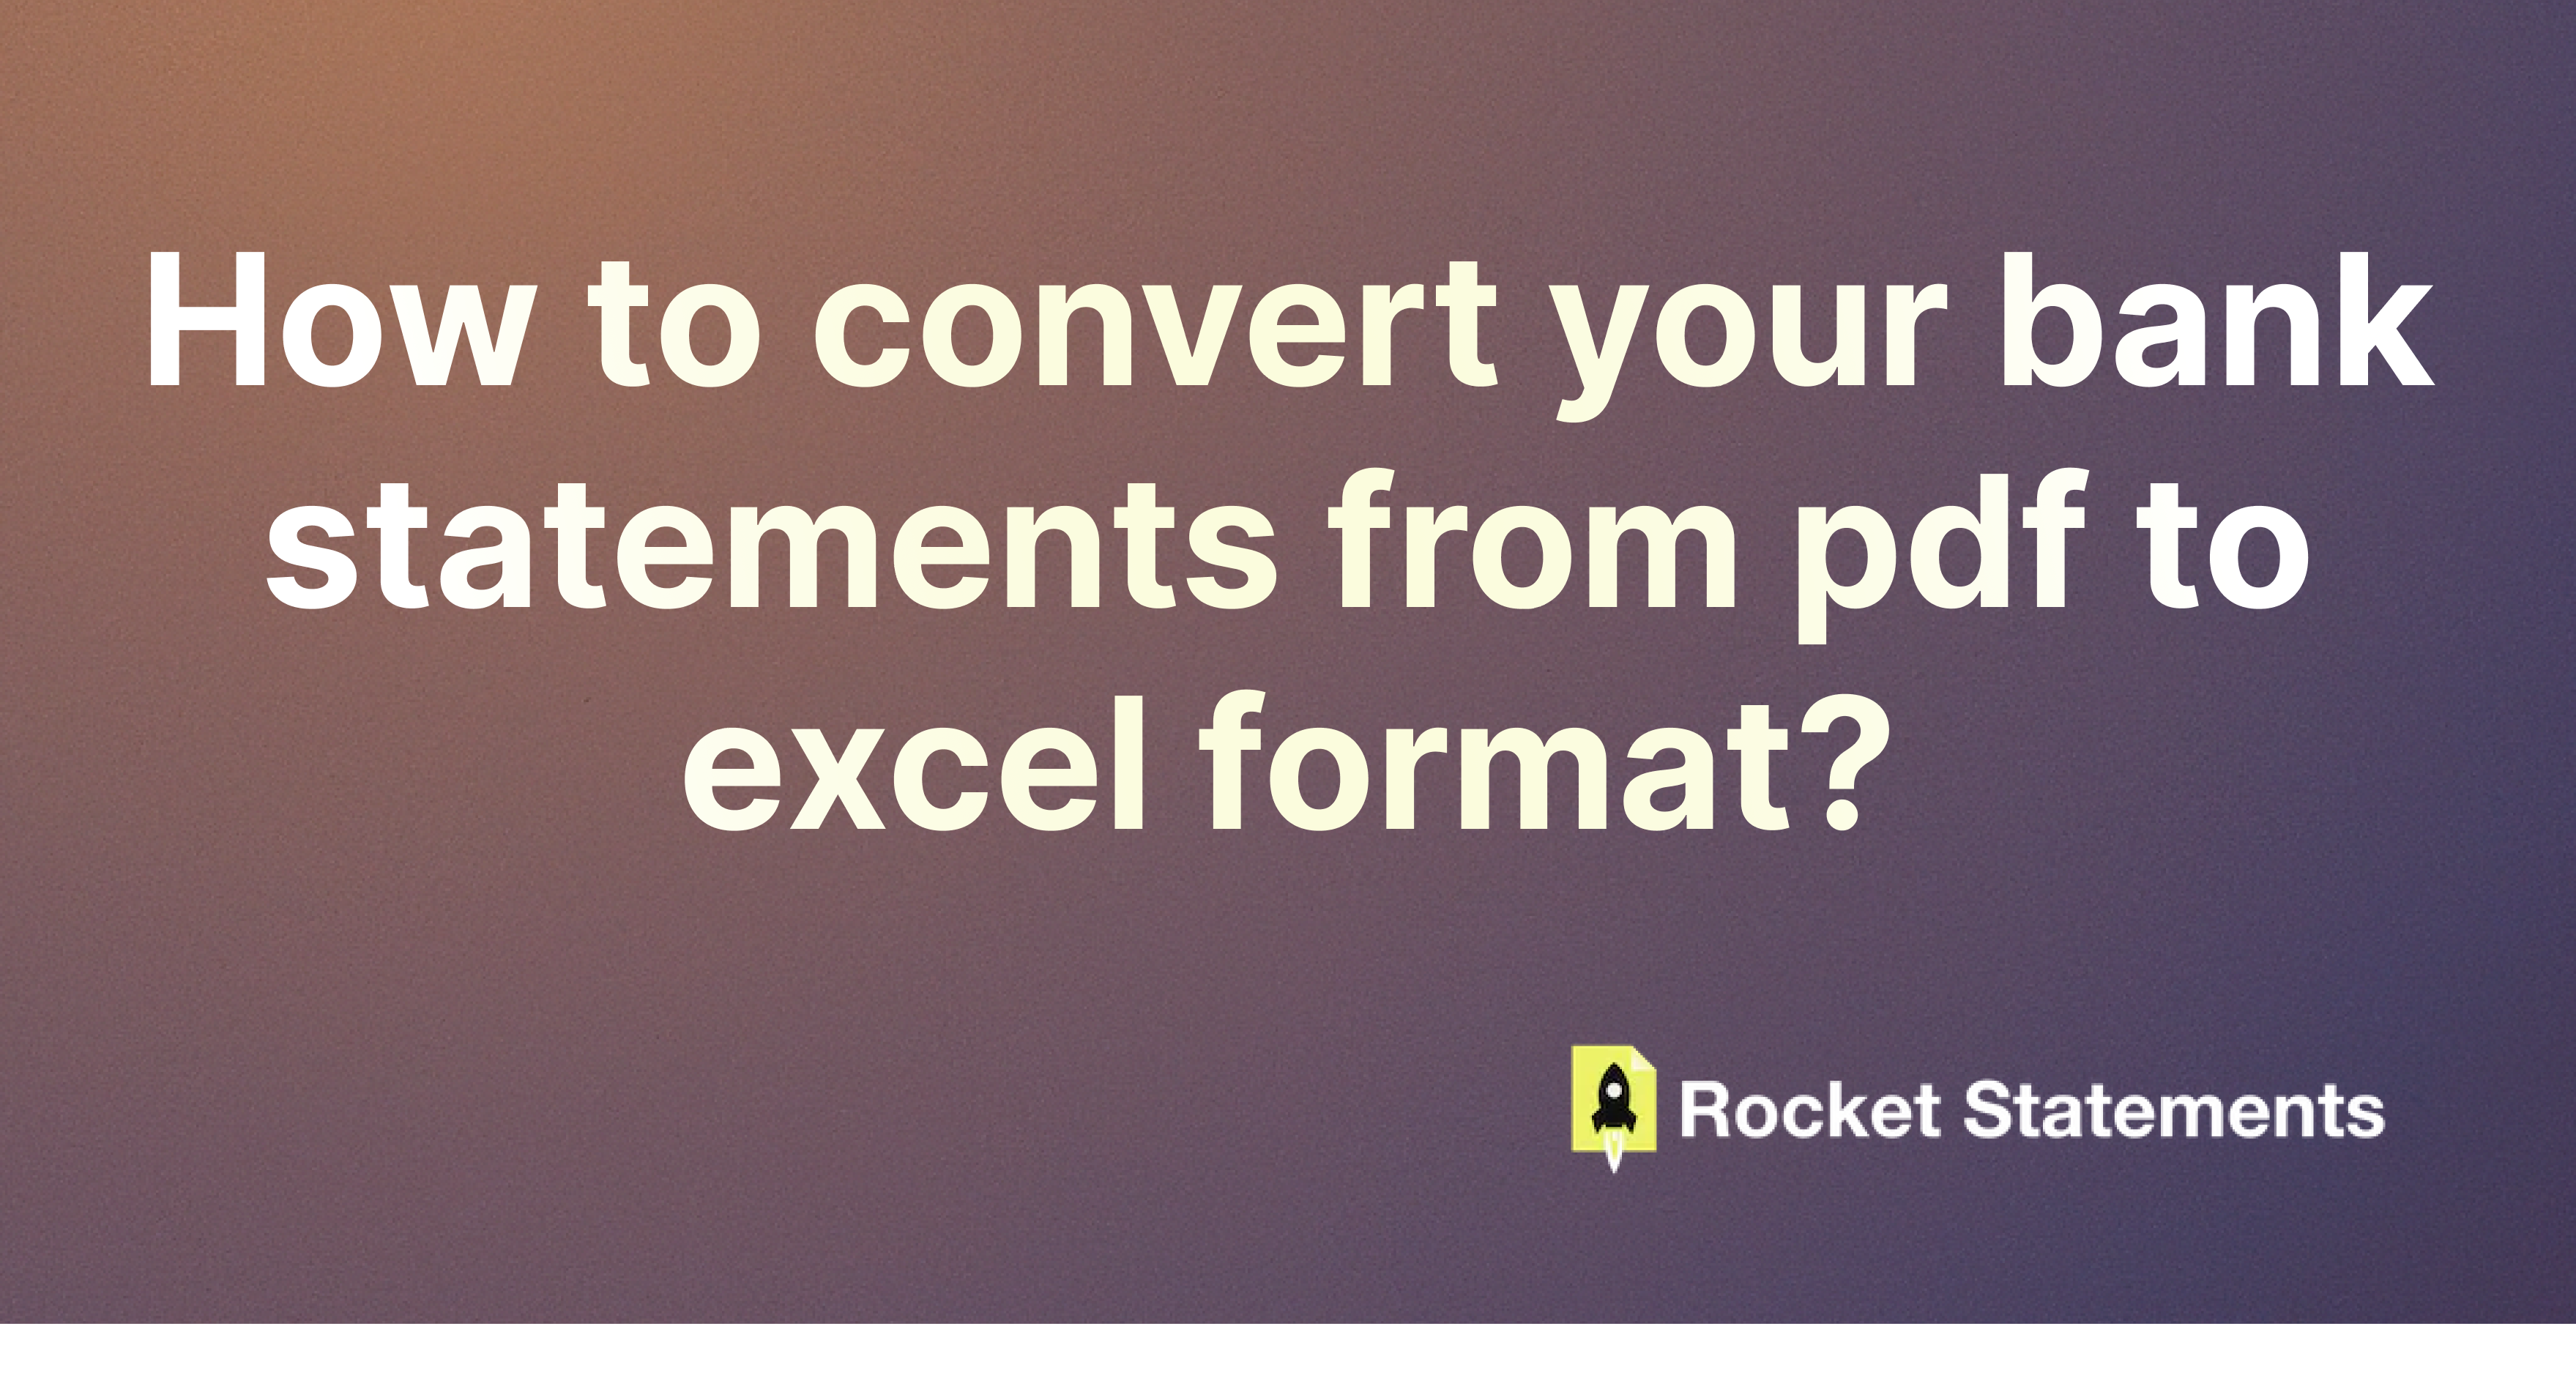 How to convert your bank statements from pdf to excel format?